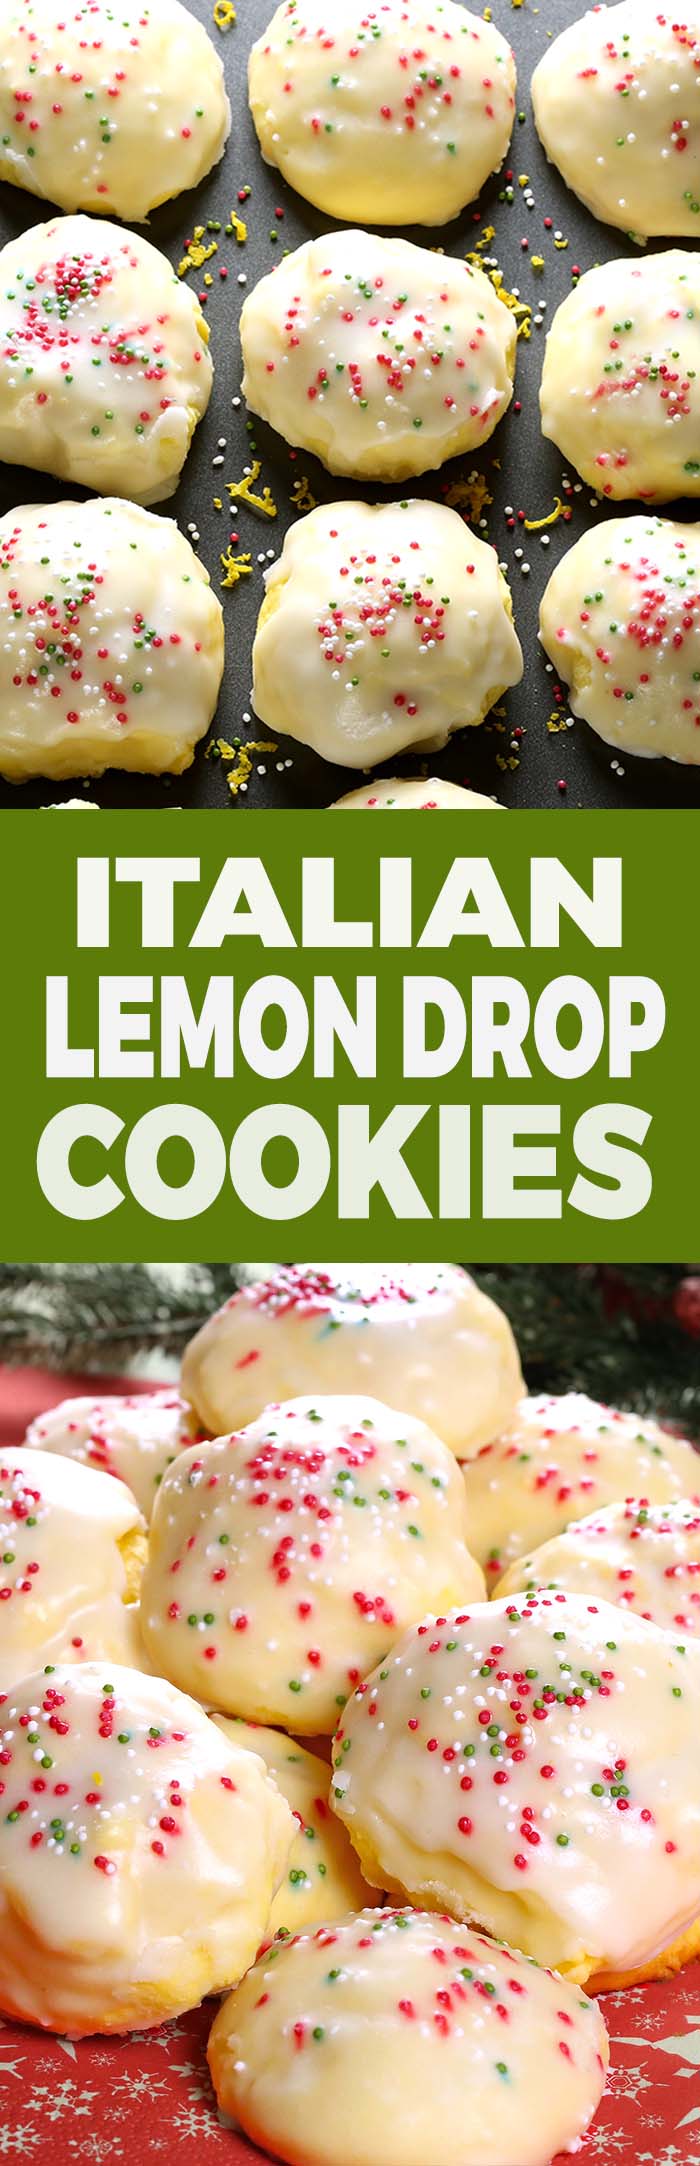 Lemon drop cookies, iced Italian cookies or anginetti, whatever your family calls them you’ll be sure to find these traditional Italian cookies at many special occasions and holiday cookie trays.